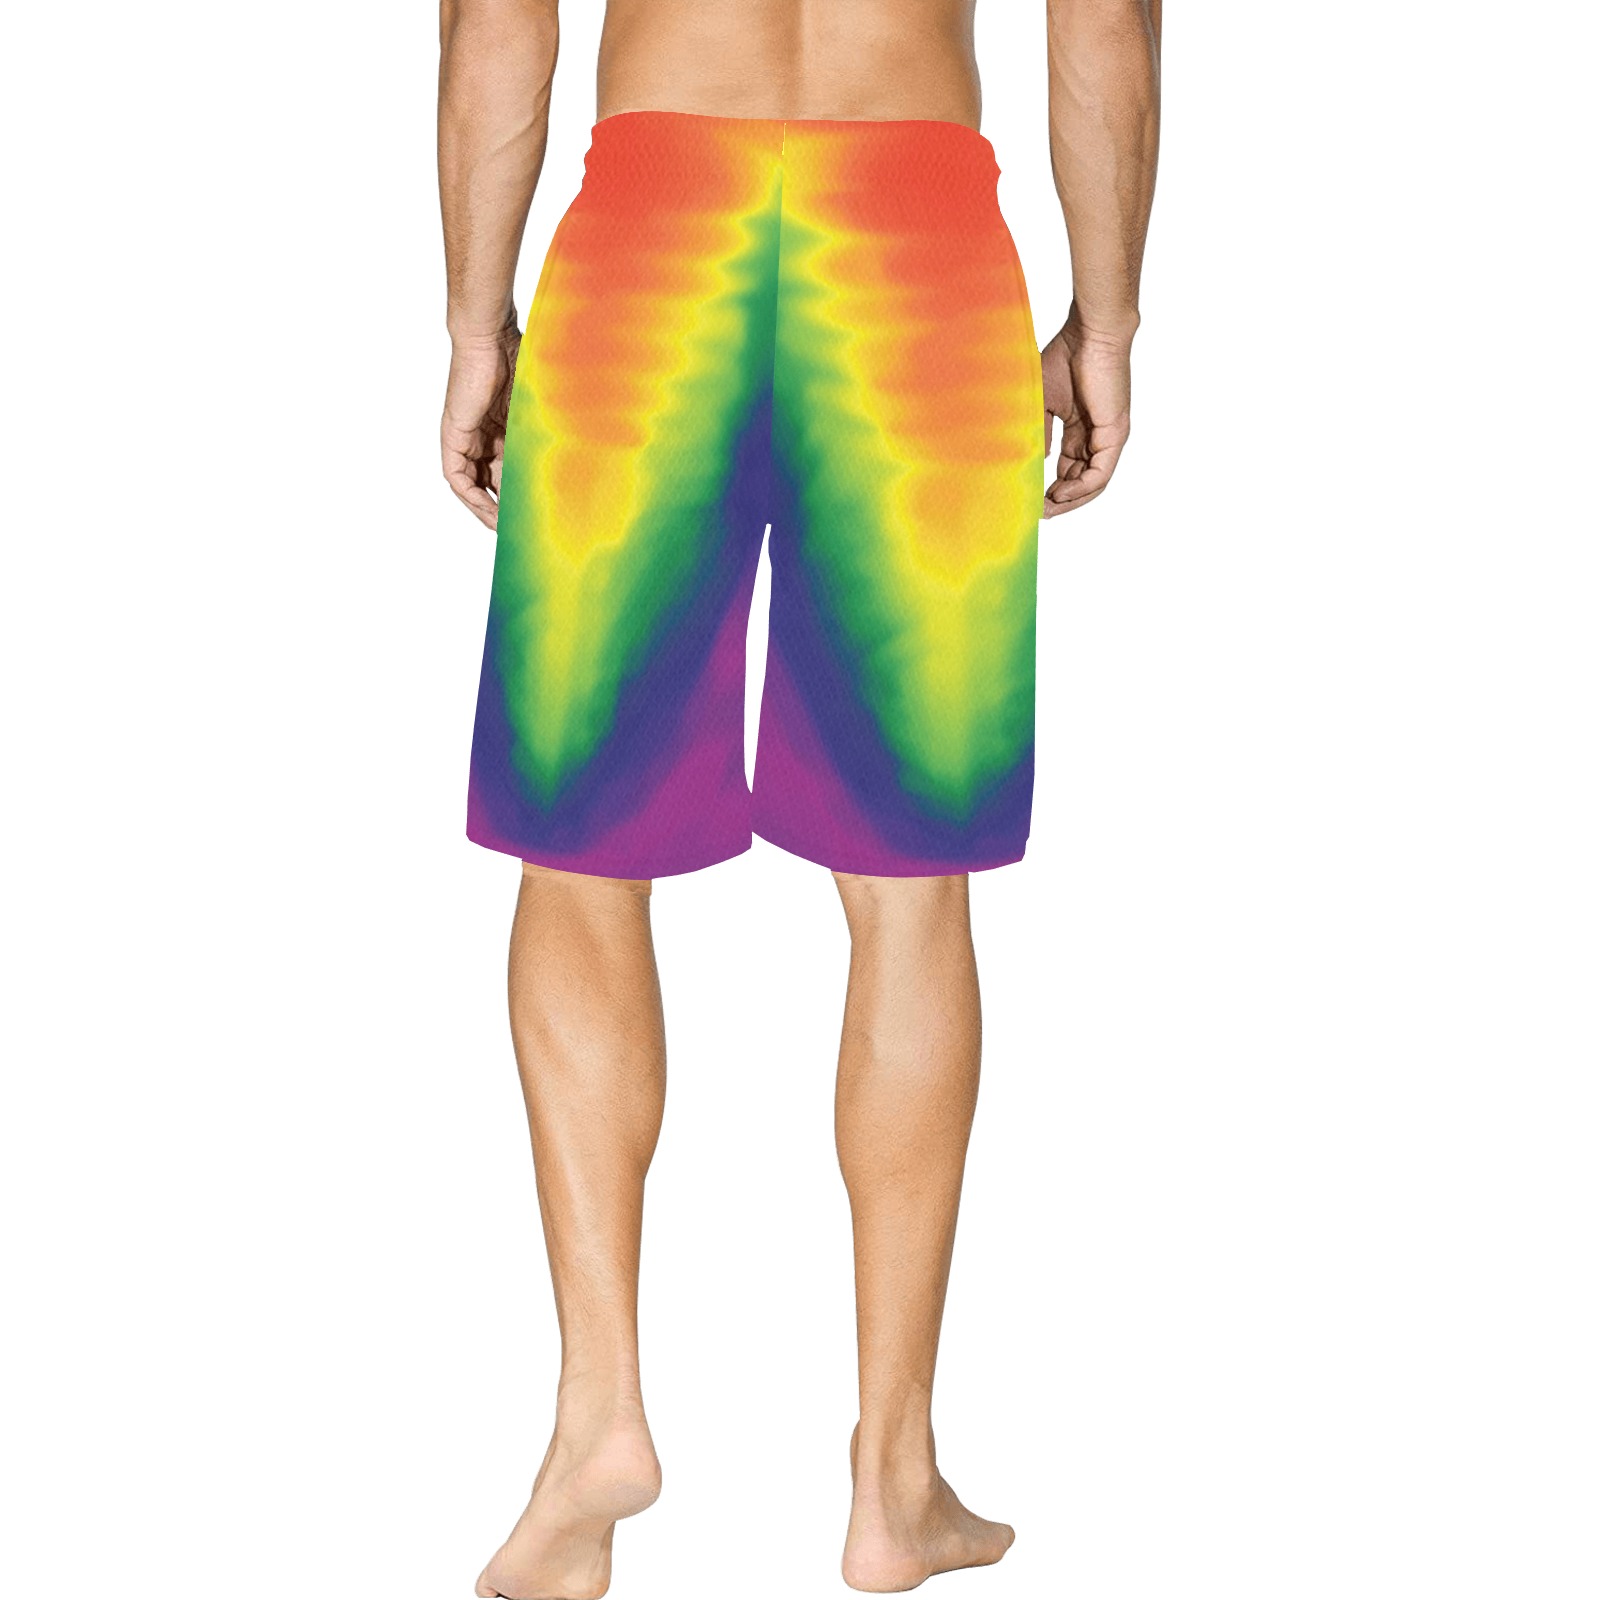 Refactor rainbow All Over Print Basketball Shorts with Pocket